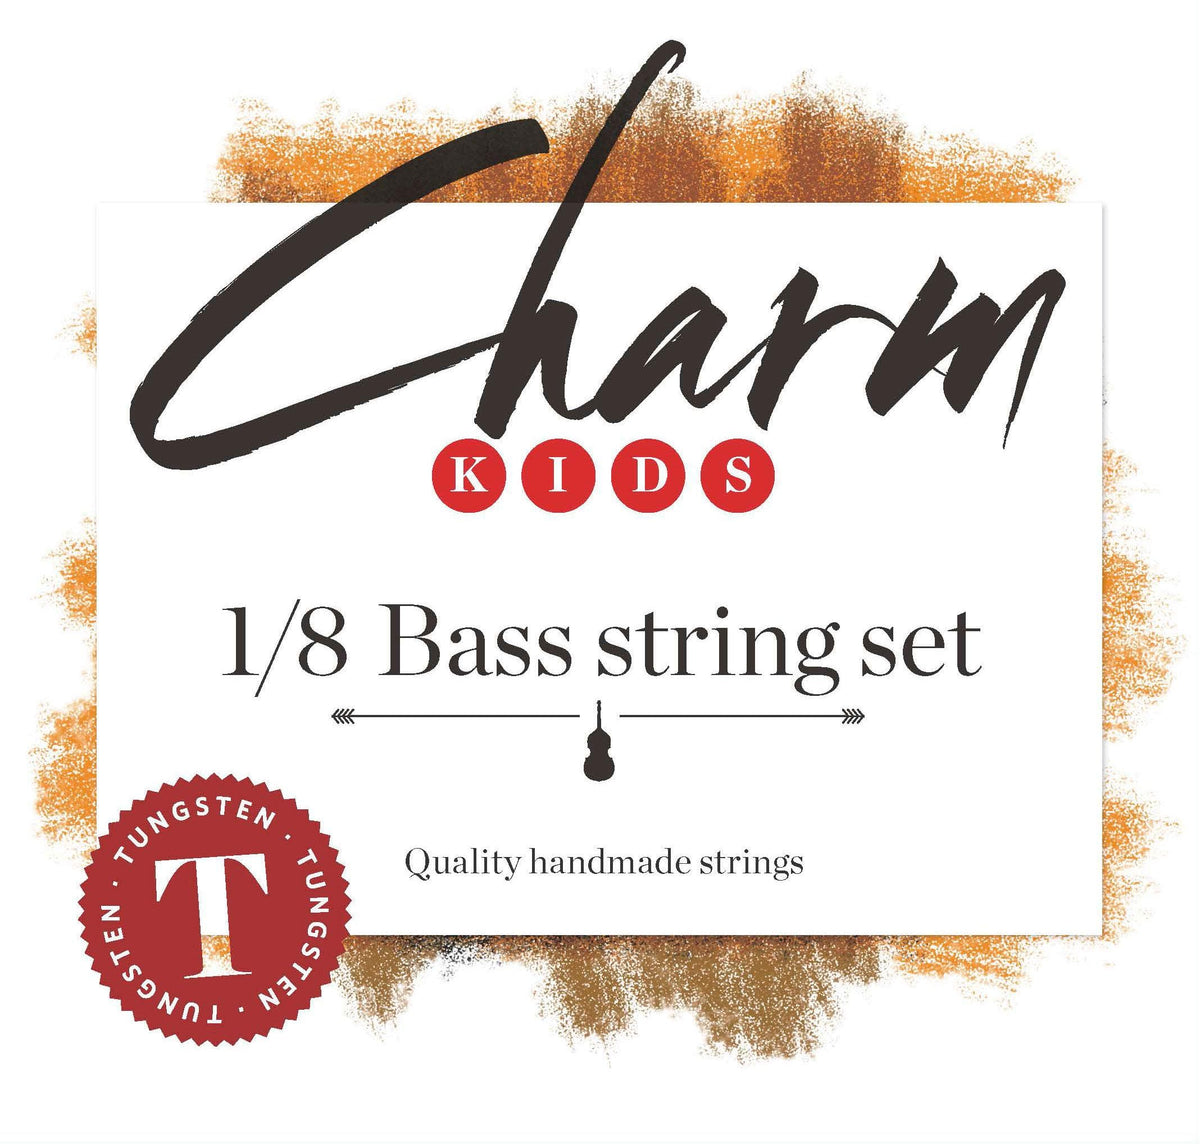 Charm Bass Orchestra String Set 1/8 Size